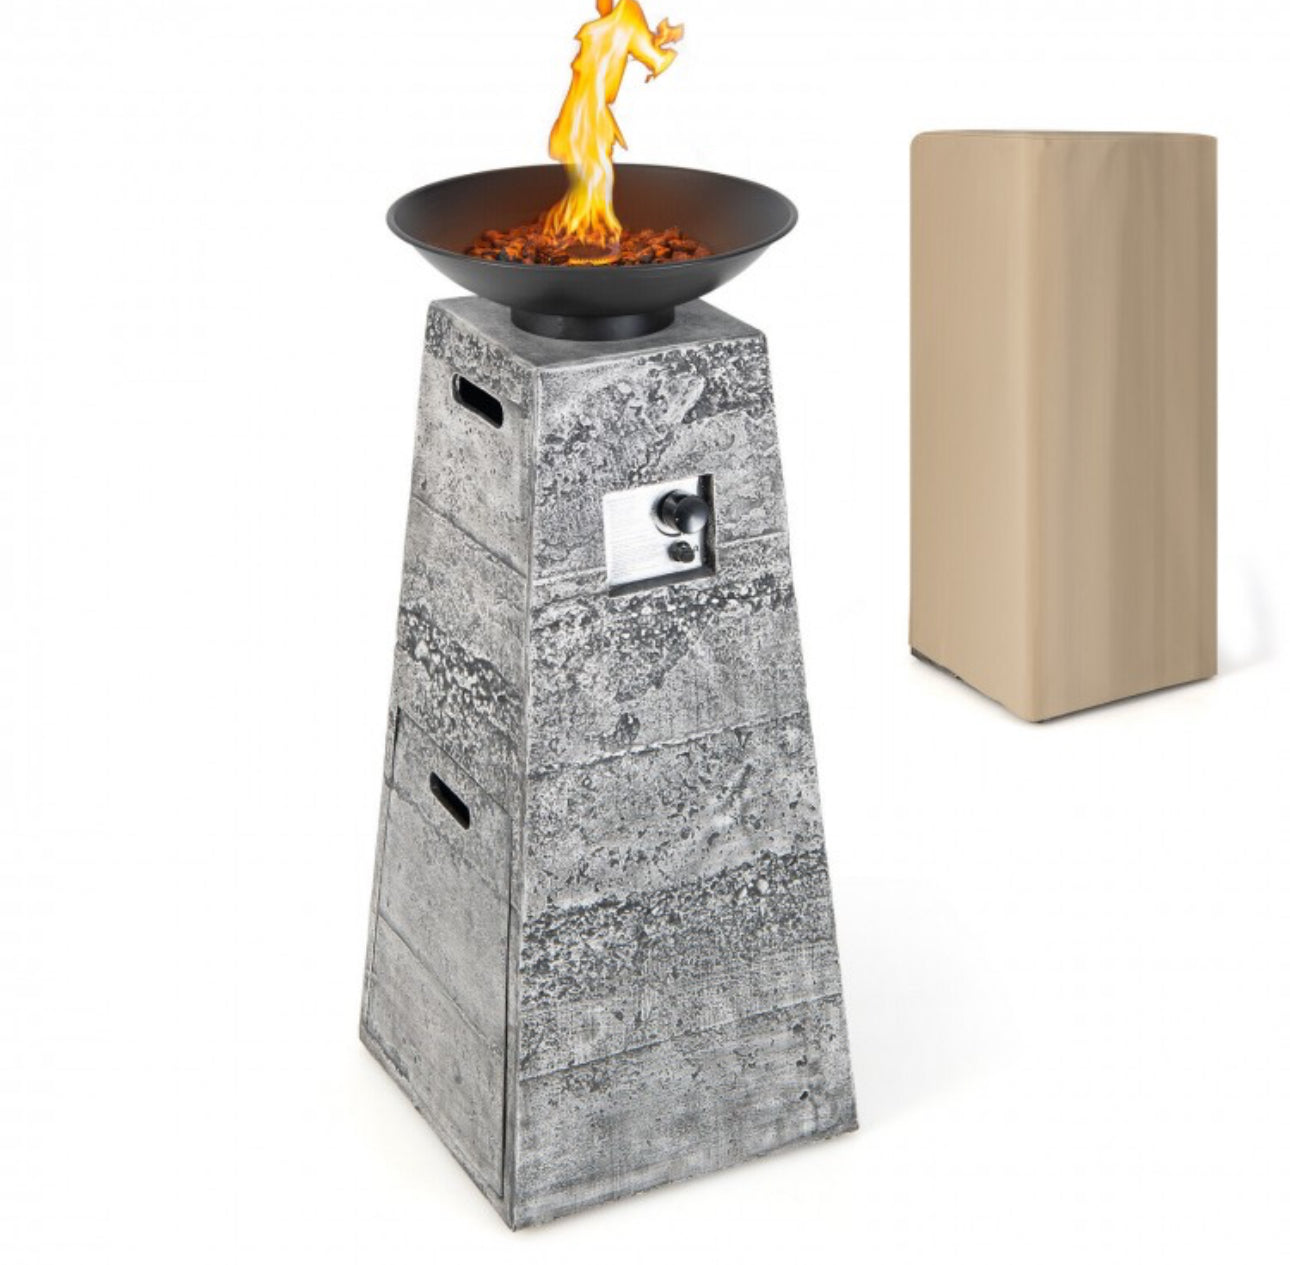 Elegant Heavy Duty 48 Inch Propane Fire Bowl Column With Beautiful Lava Rocks & PVC Cover | Easy Access Door | Easy On/Off Switch | Patio Fire Pit